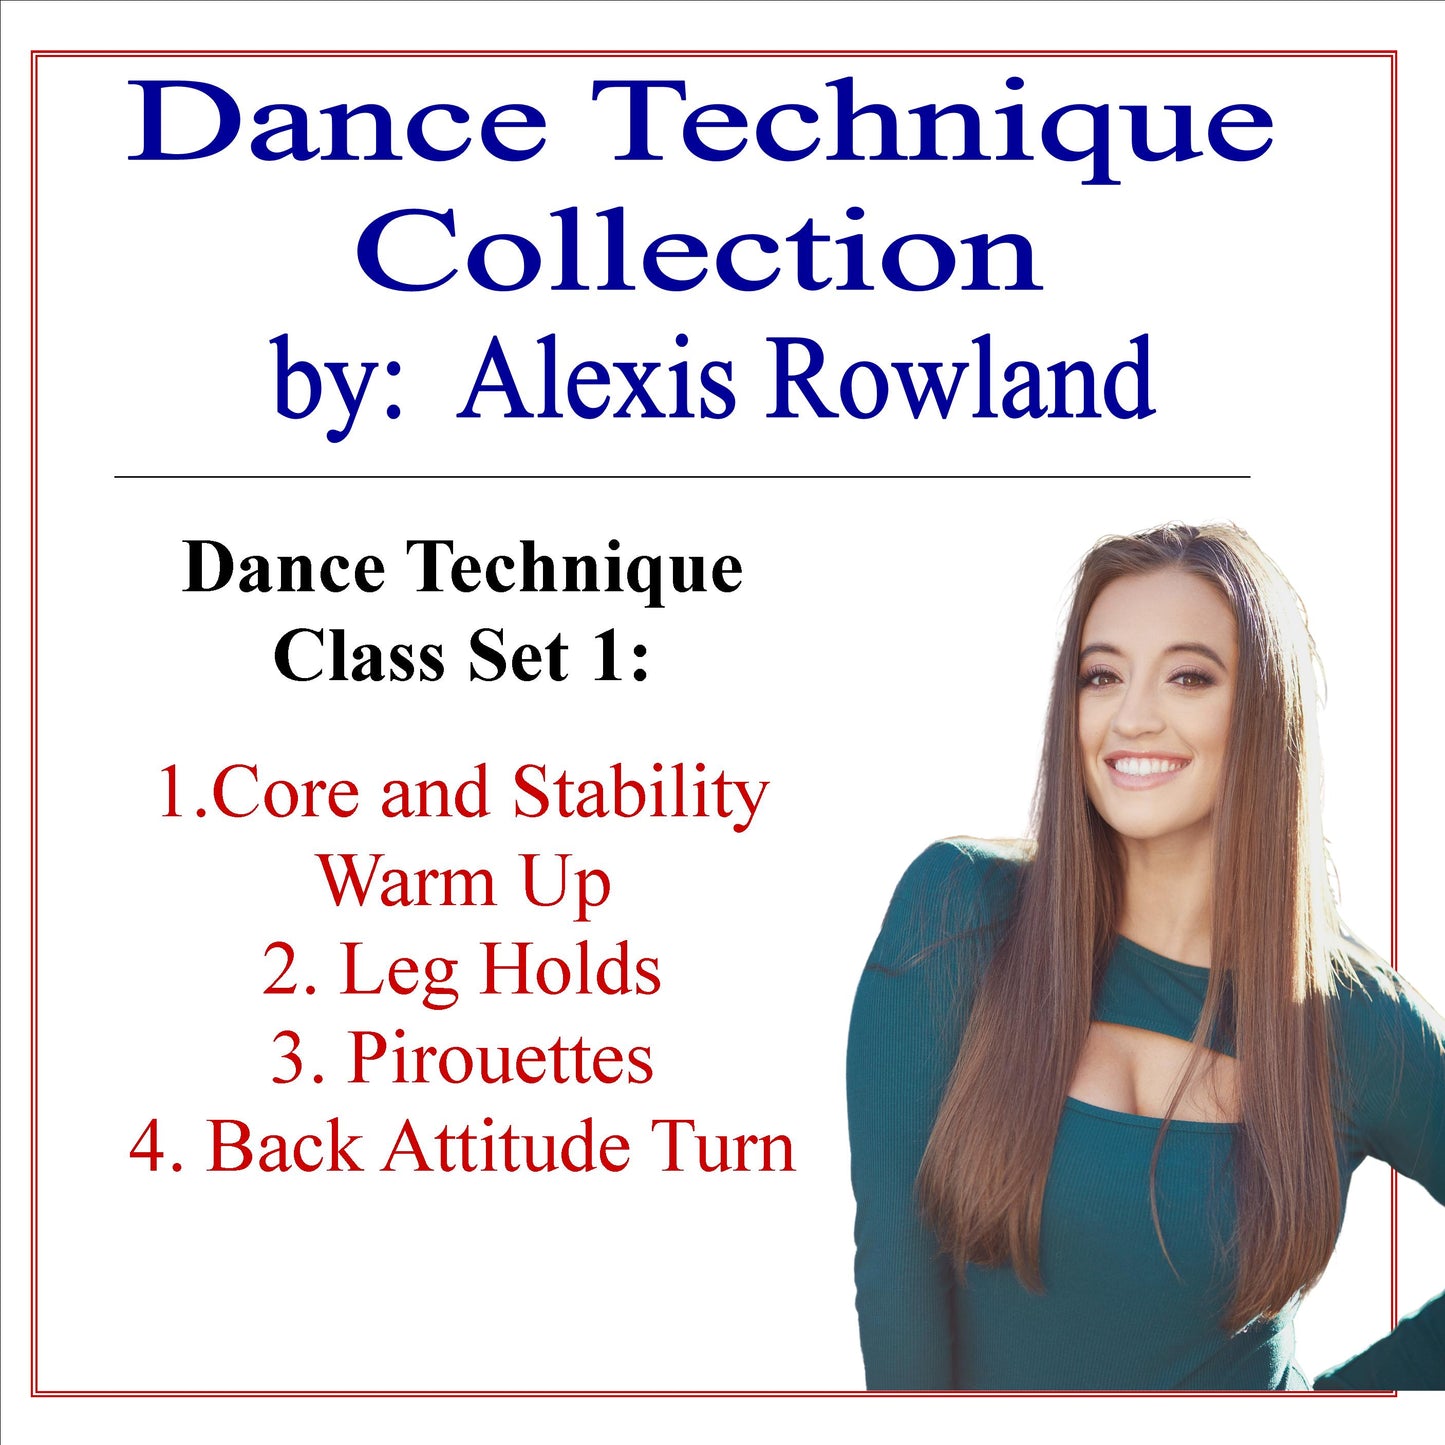 Dance Technique Classes Set 1: Leg Holds, Pirouettes and Back Attitude Turn  by Alexis Rowland - Cheer and Dance On Demand